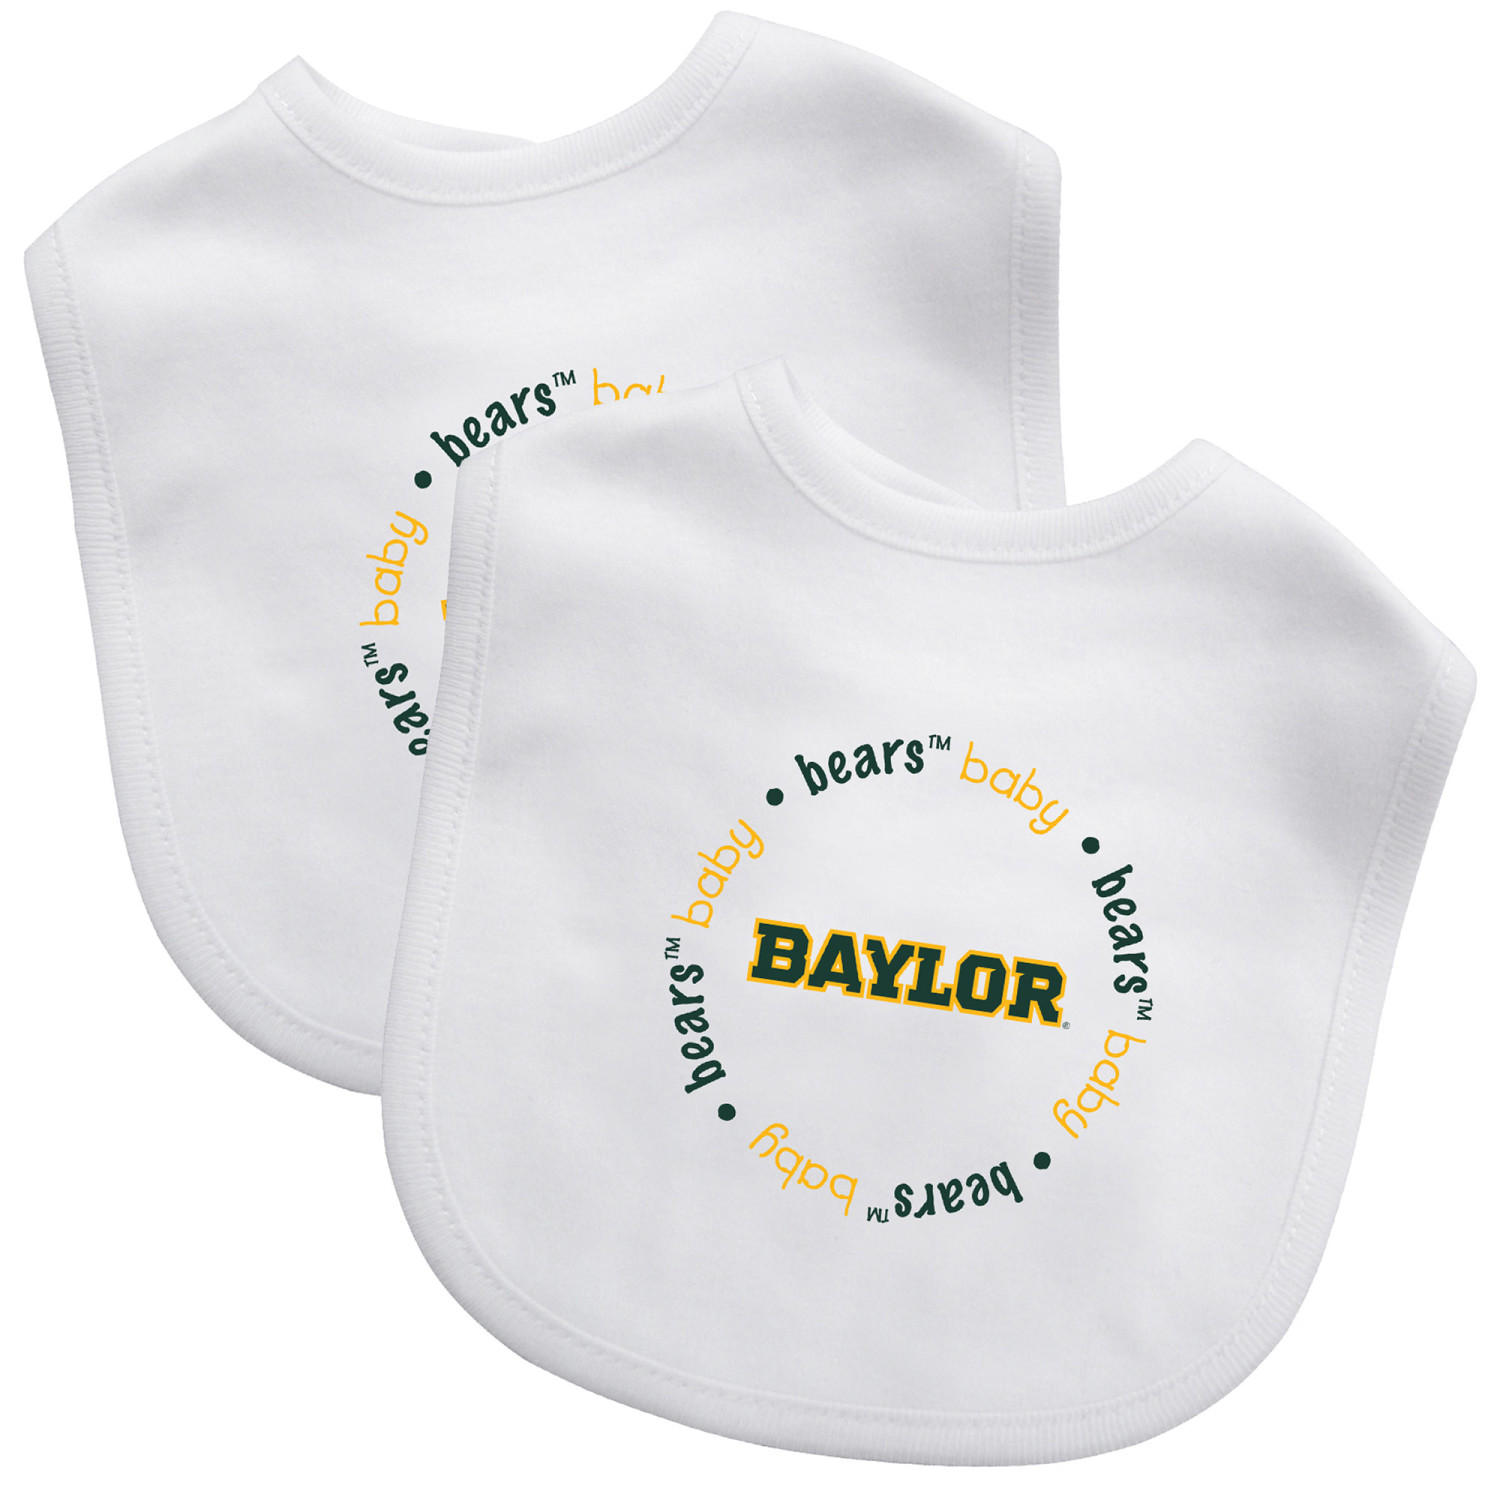 BabyFanatic Officially Licensed Unisex Baby Bibs 2 Pack - NCAA Baylor Bears - image 2 of 3